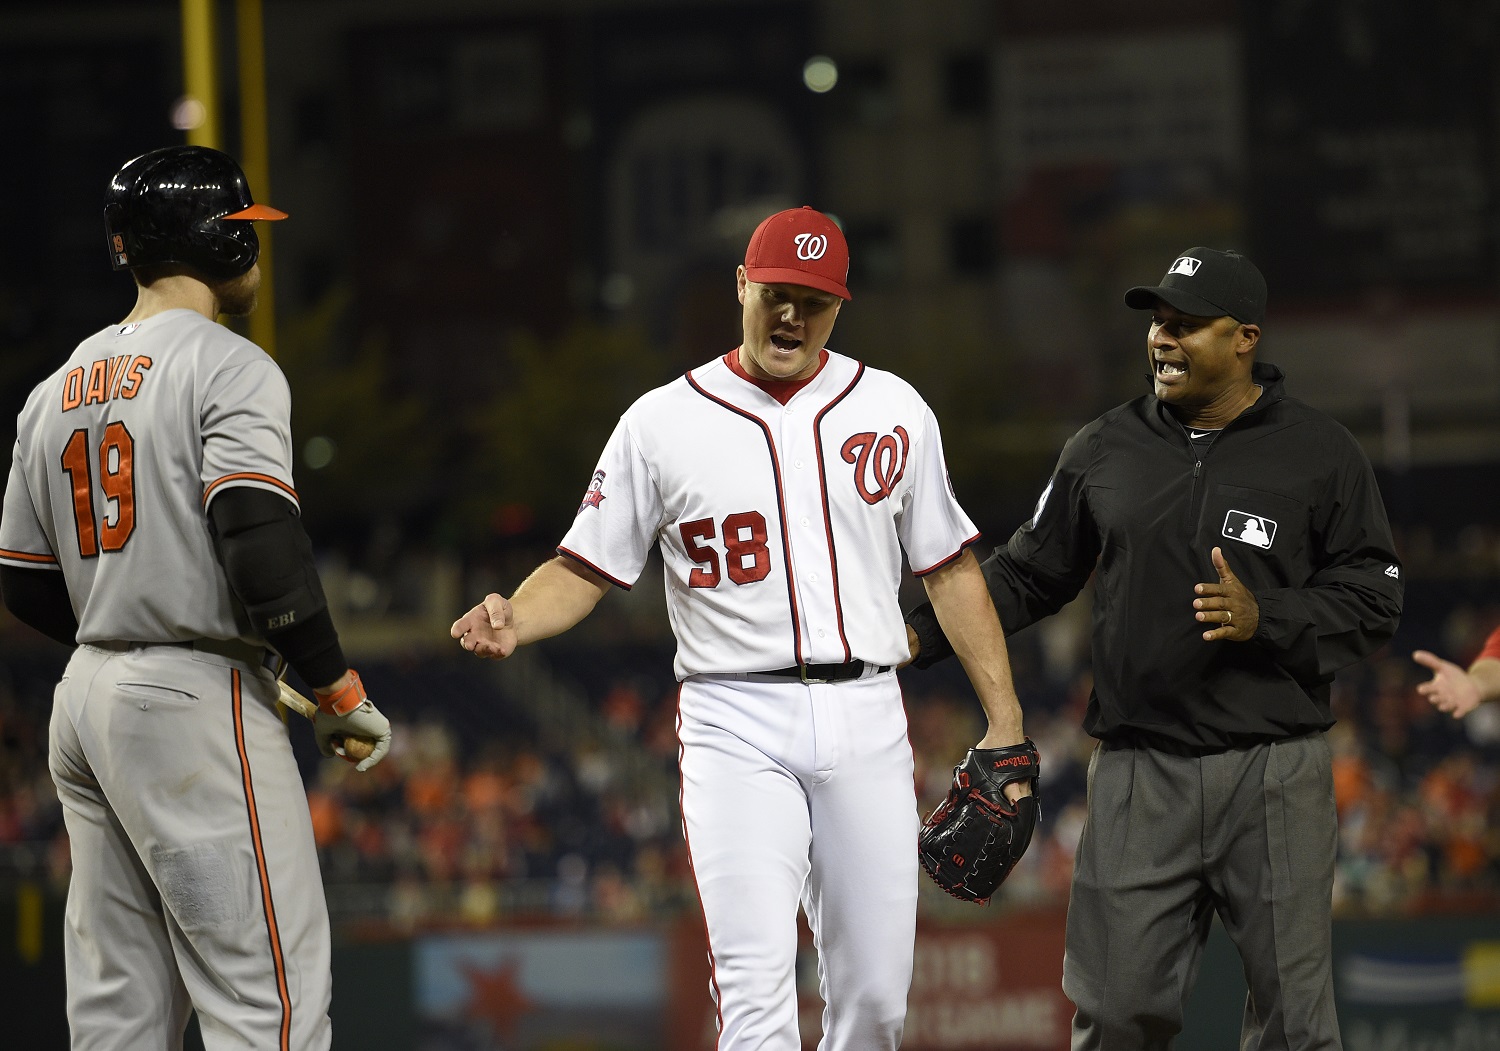 Washington Nationals relief pitcher Jonathan Papelbon (58) reacts next to and umpire Alan Porter, right, during the ninth inning of an interleague baseball game, Wednesday, Sept. 23, 2015, in Washington. Papelbon was ejected for hitting Baltimore Orioles' Manny Machado with a pitch. Also seen is Baltimore Orioles' Chris Davis. The Orioles won 4-3. (AP Photo/Nick Wass)